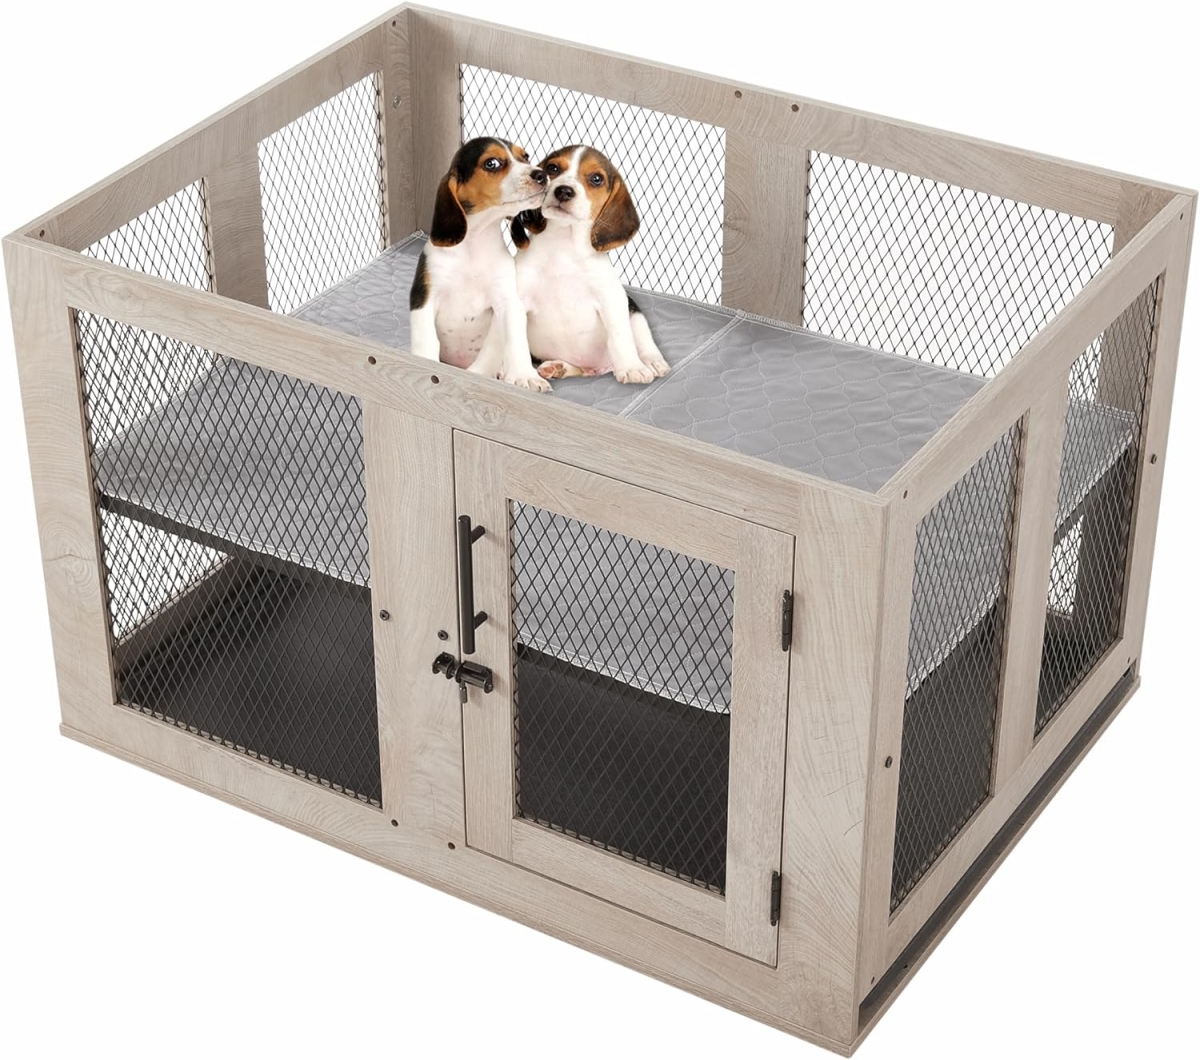 Picture of Unipaws UH5208 Puppy Playpen with Adjustable Floor Grid